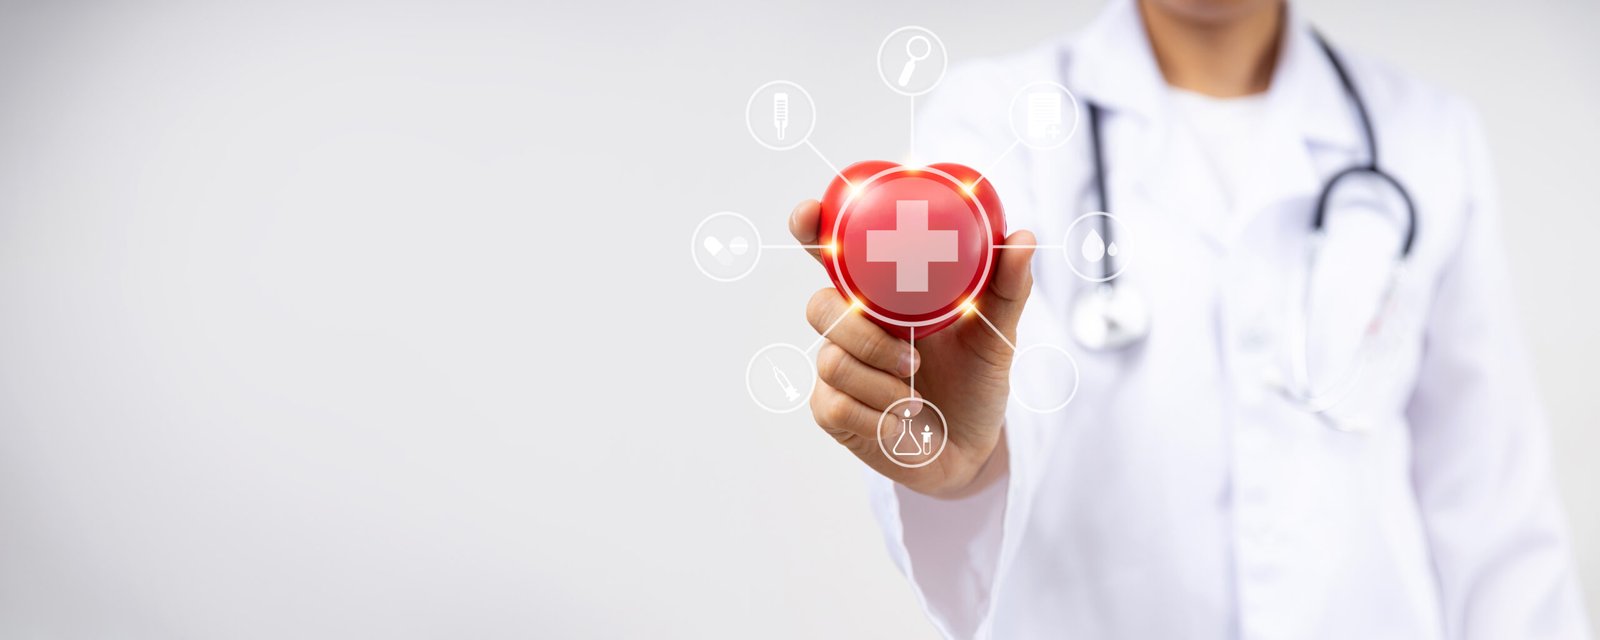 HOW OUTSOURCING EMPOWERS CARDIOLOGISTS TO PRIORITIZE PATIENT CARE